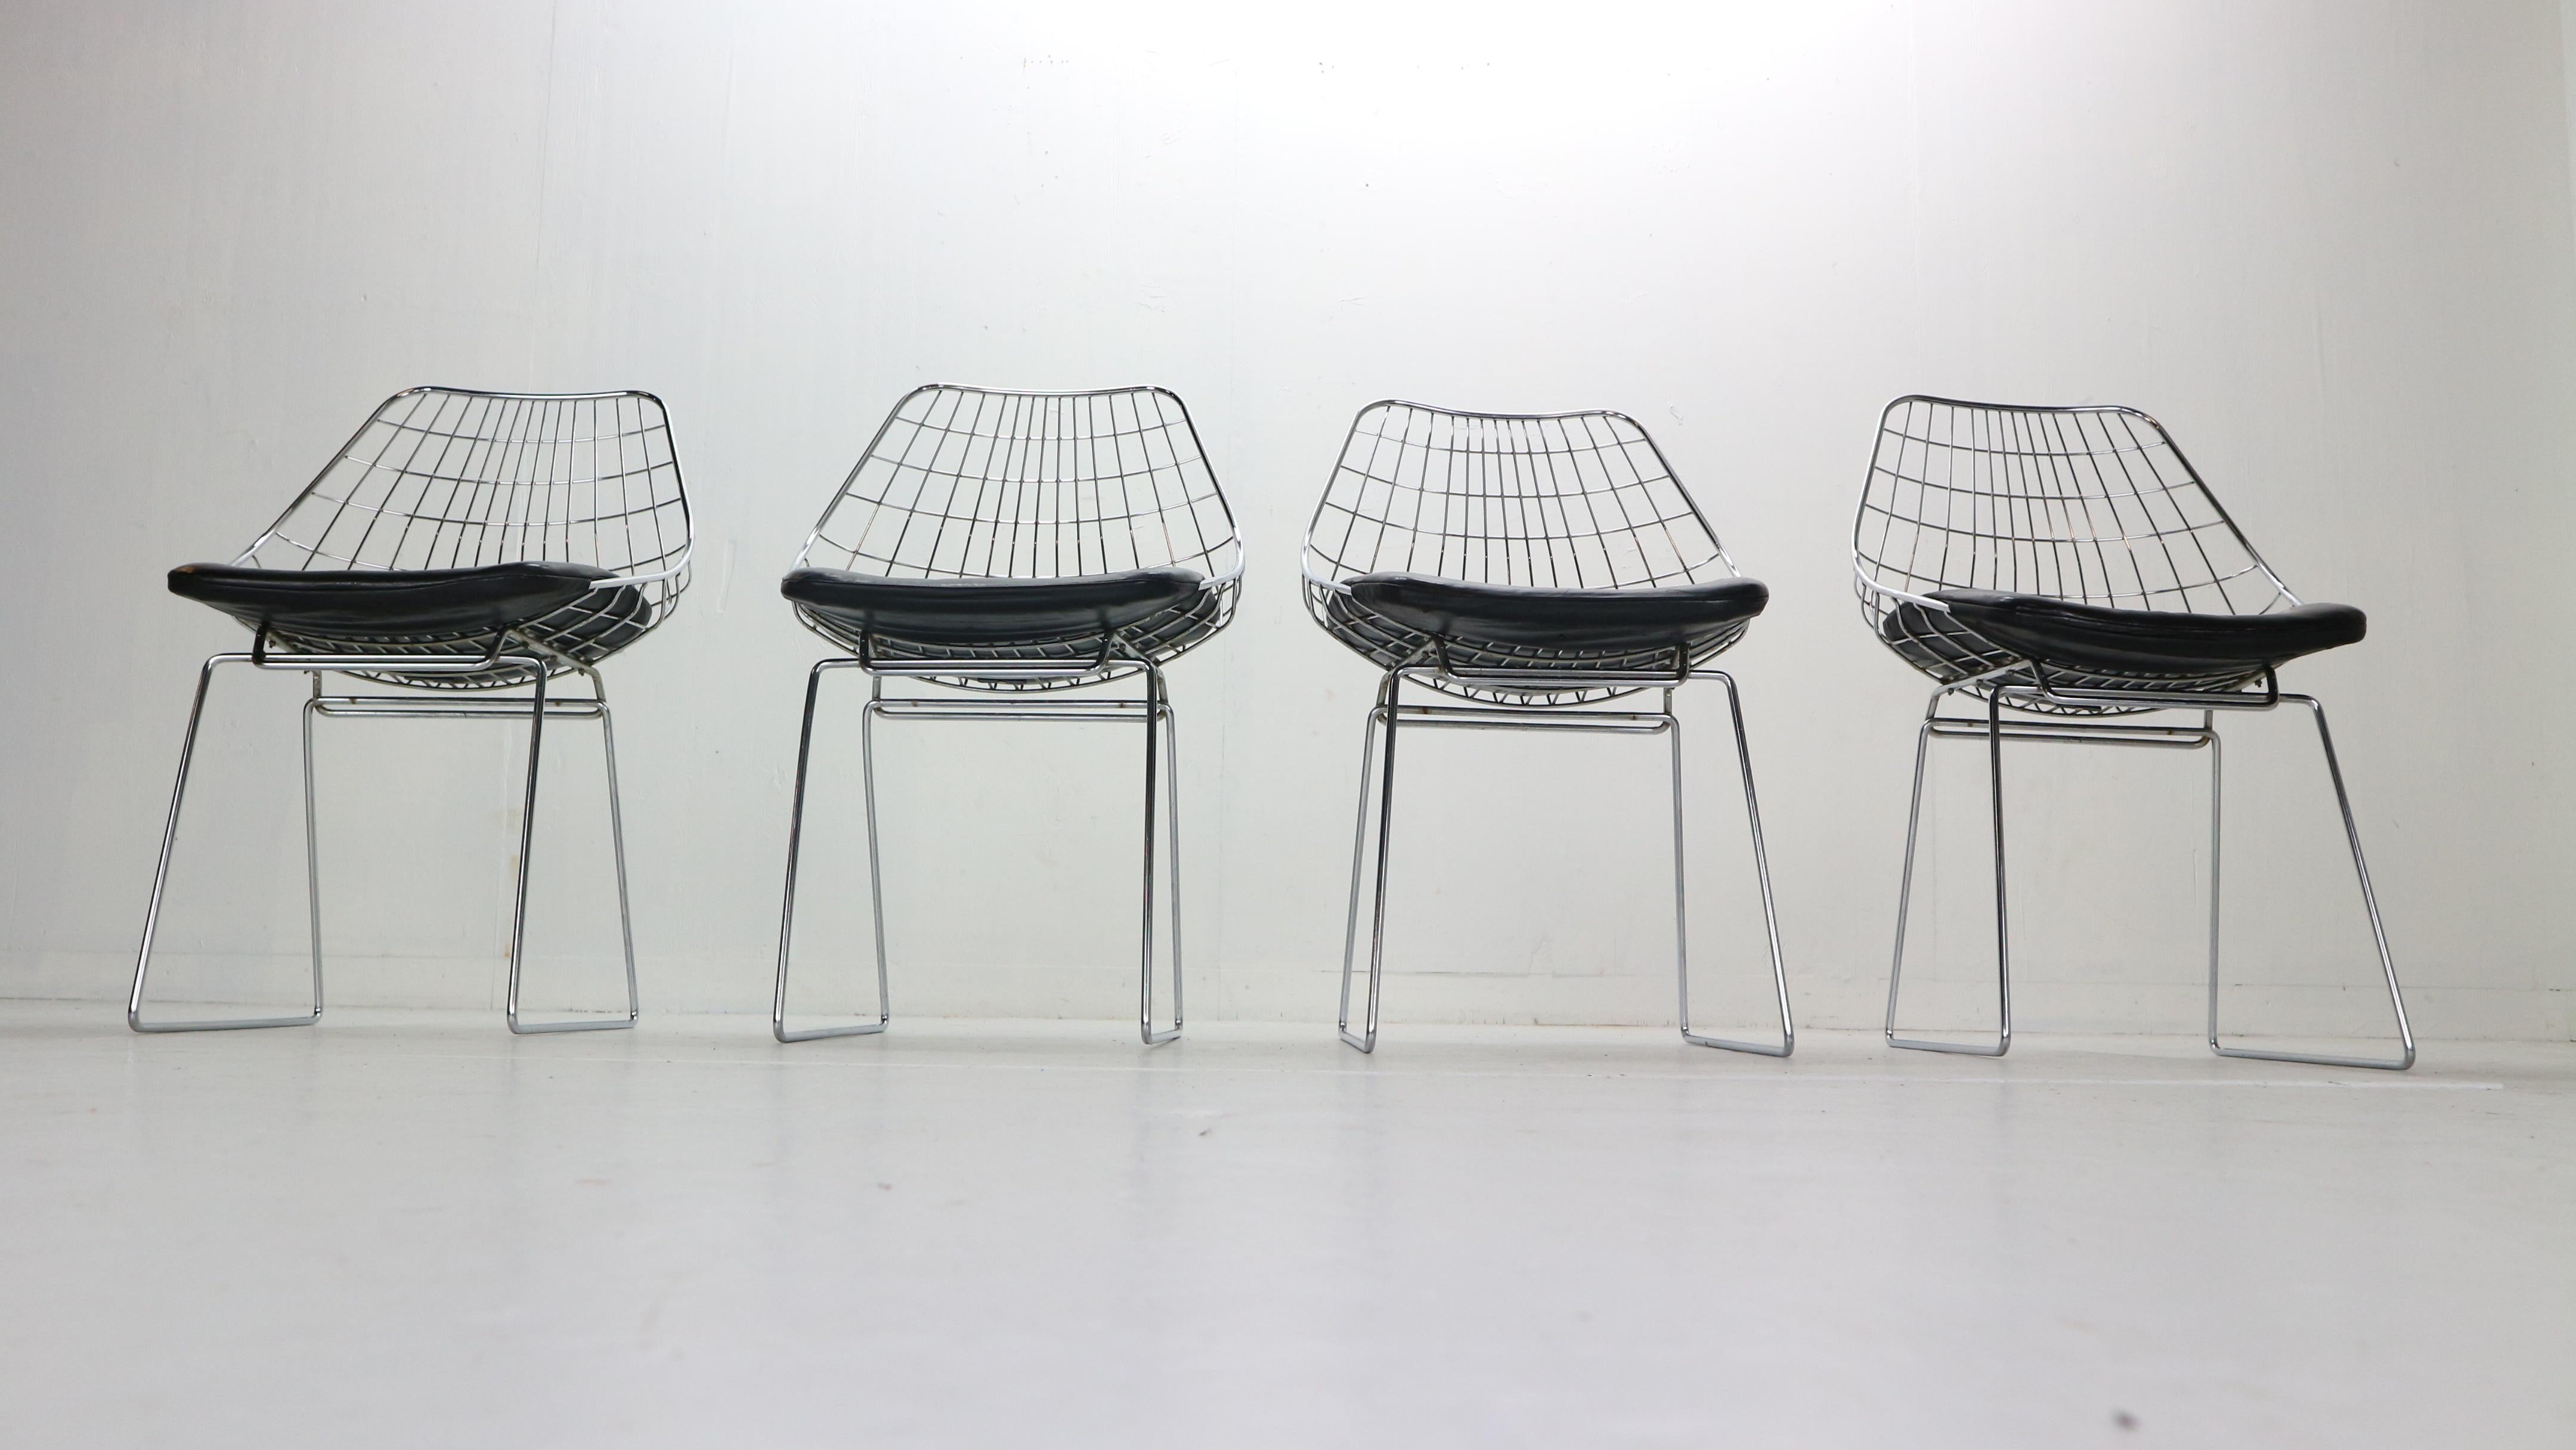 Mid-Century Modern Cees Braakman Set of 4 Wire Chairs Model, 'SM05' for Pastoe, 1950s